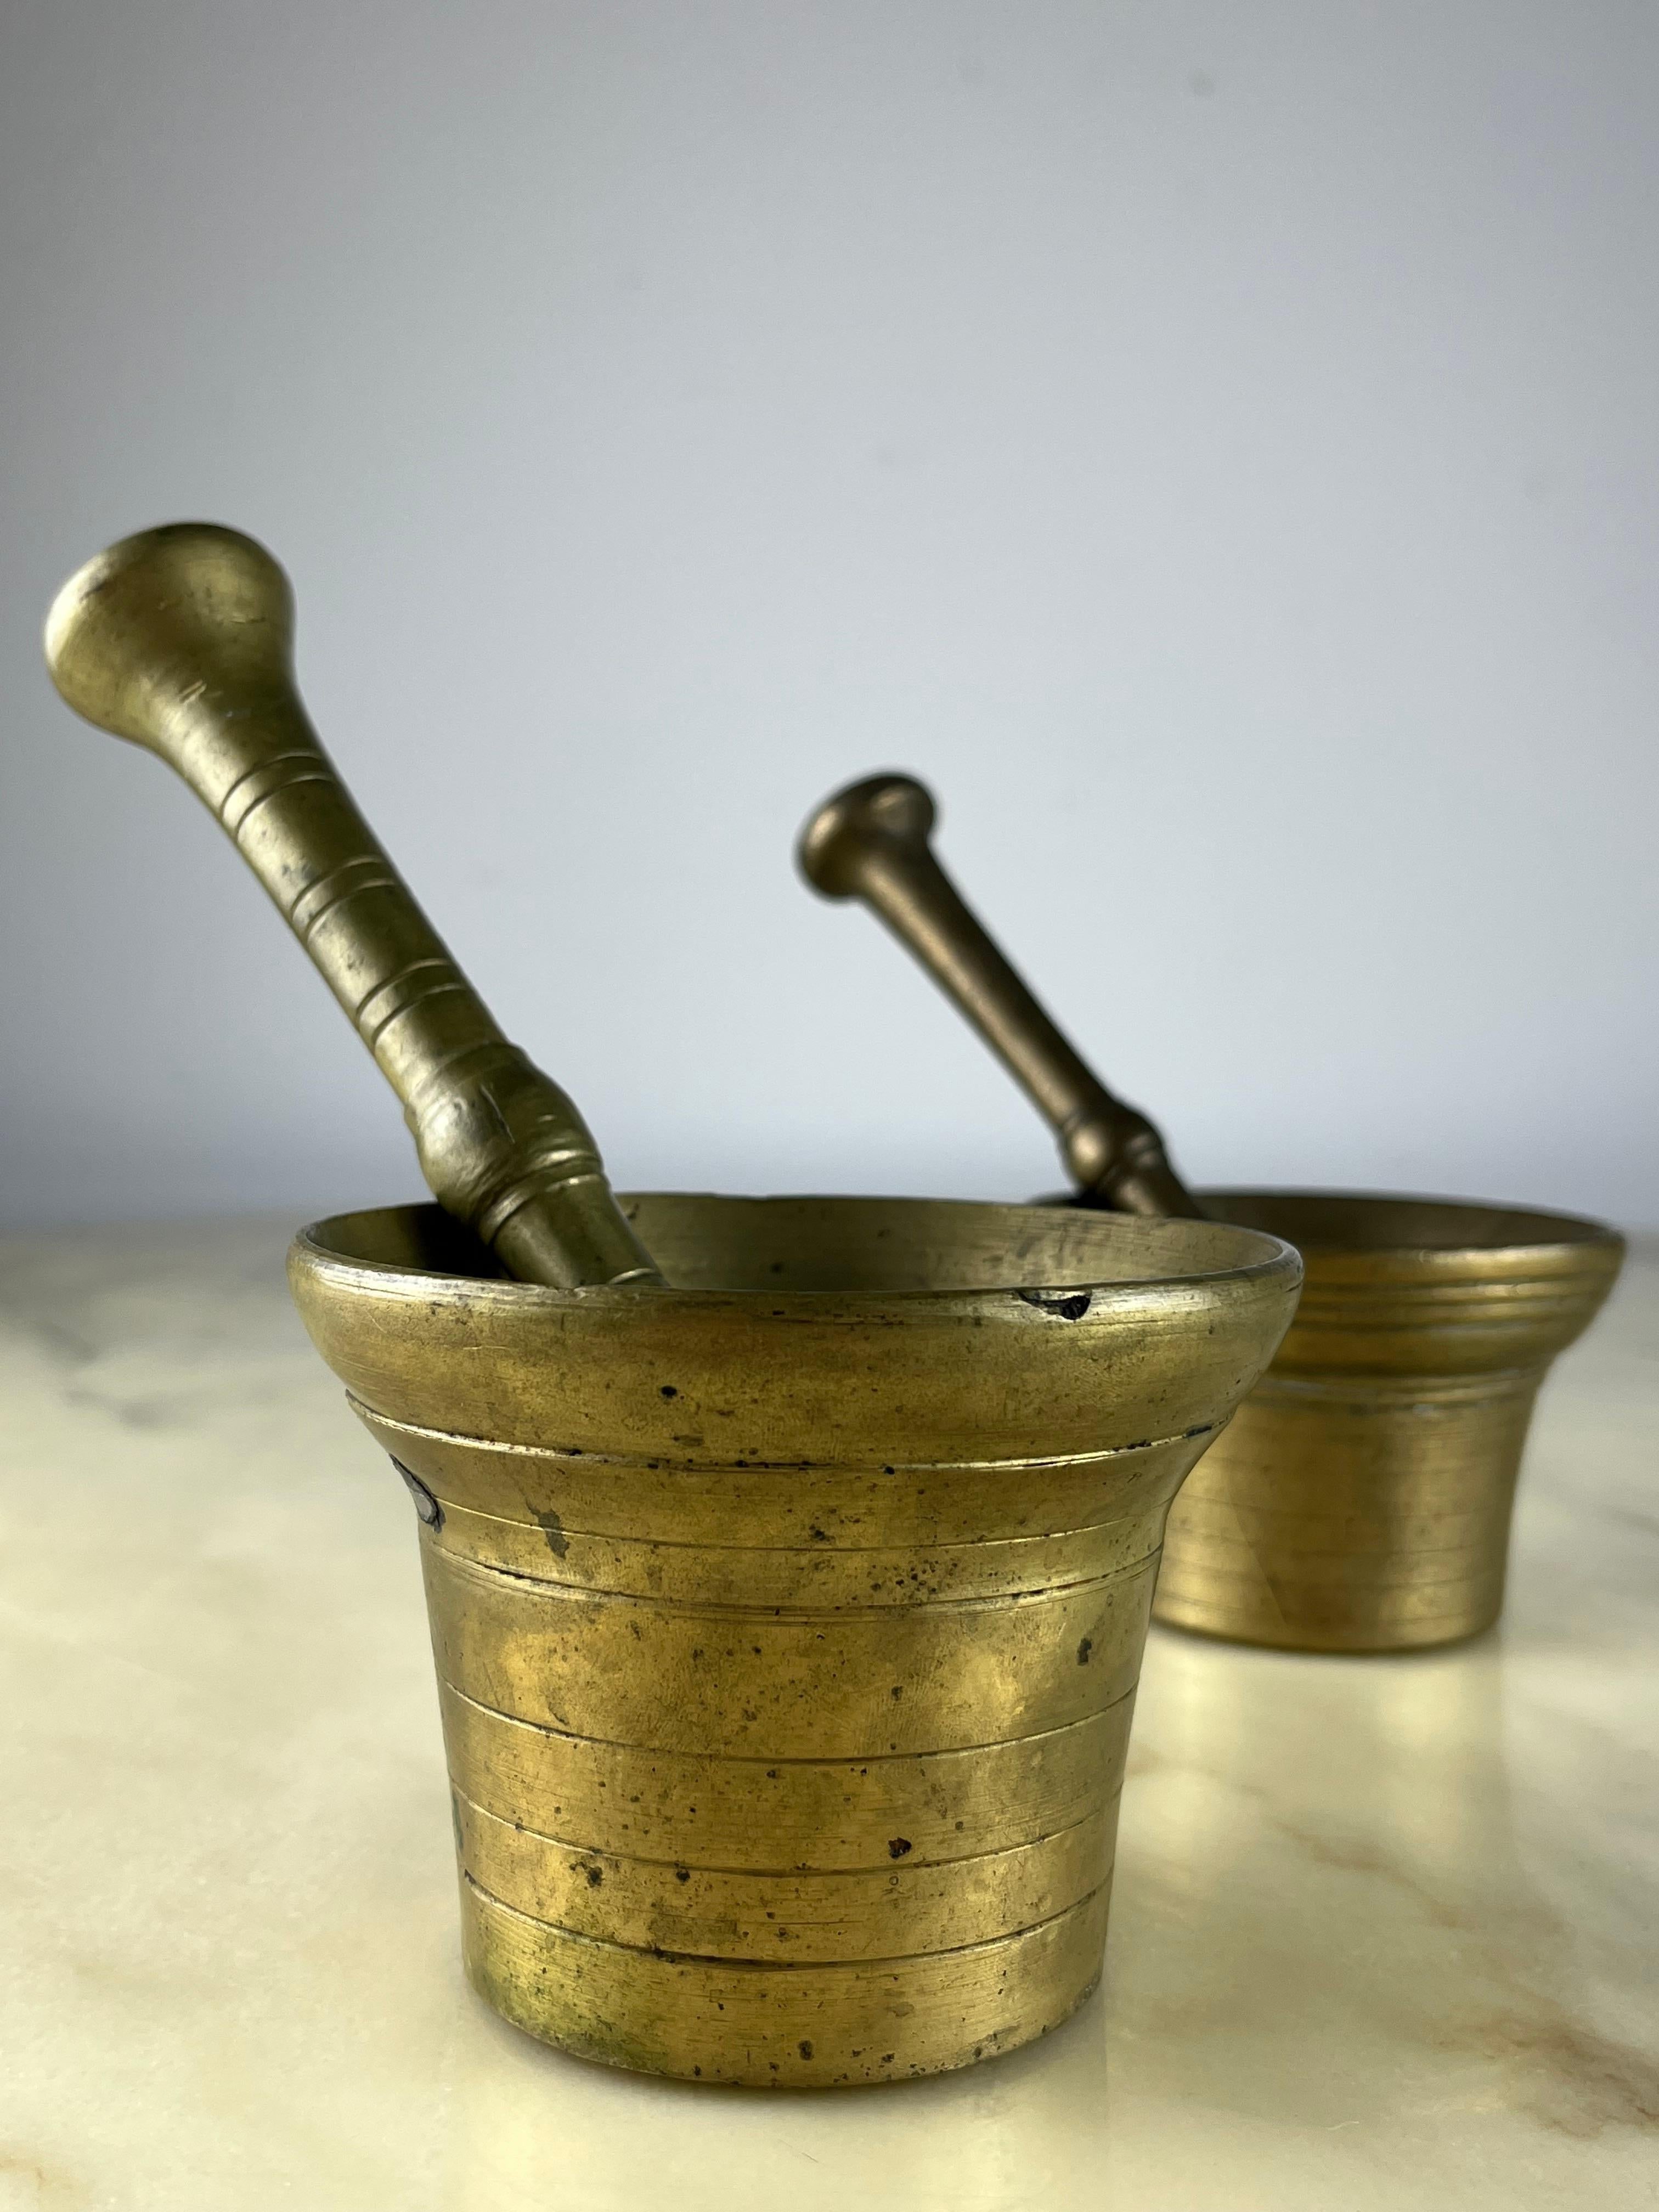 Other Two Mortars with Pestles, Brass, Genoese 